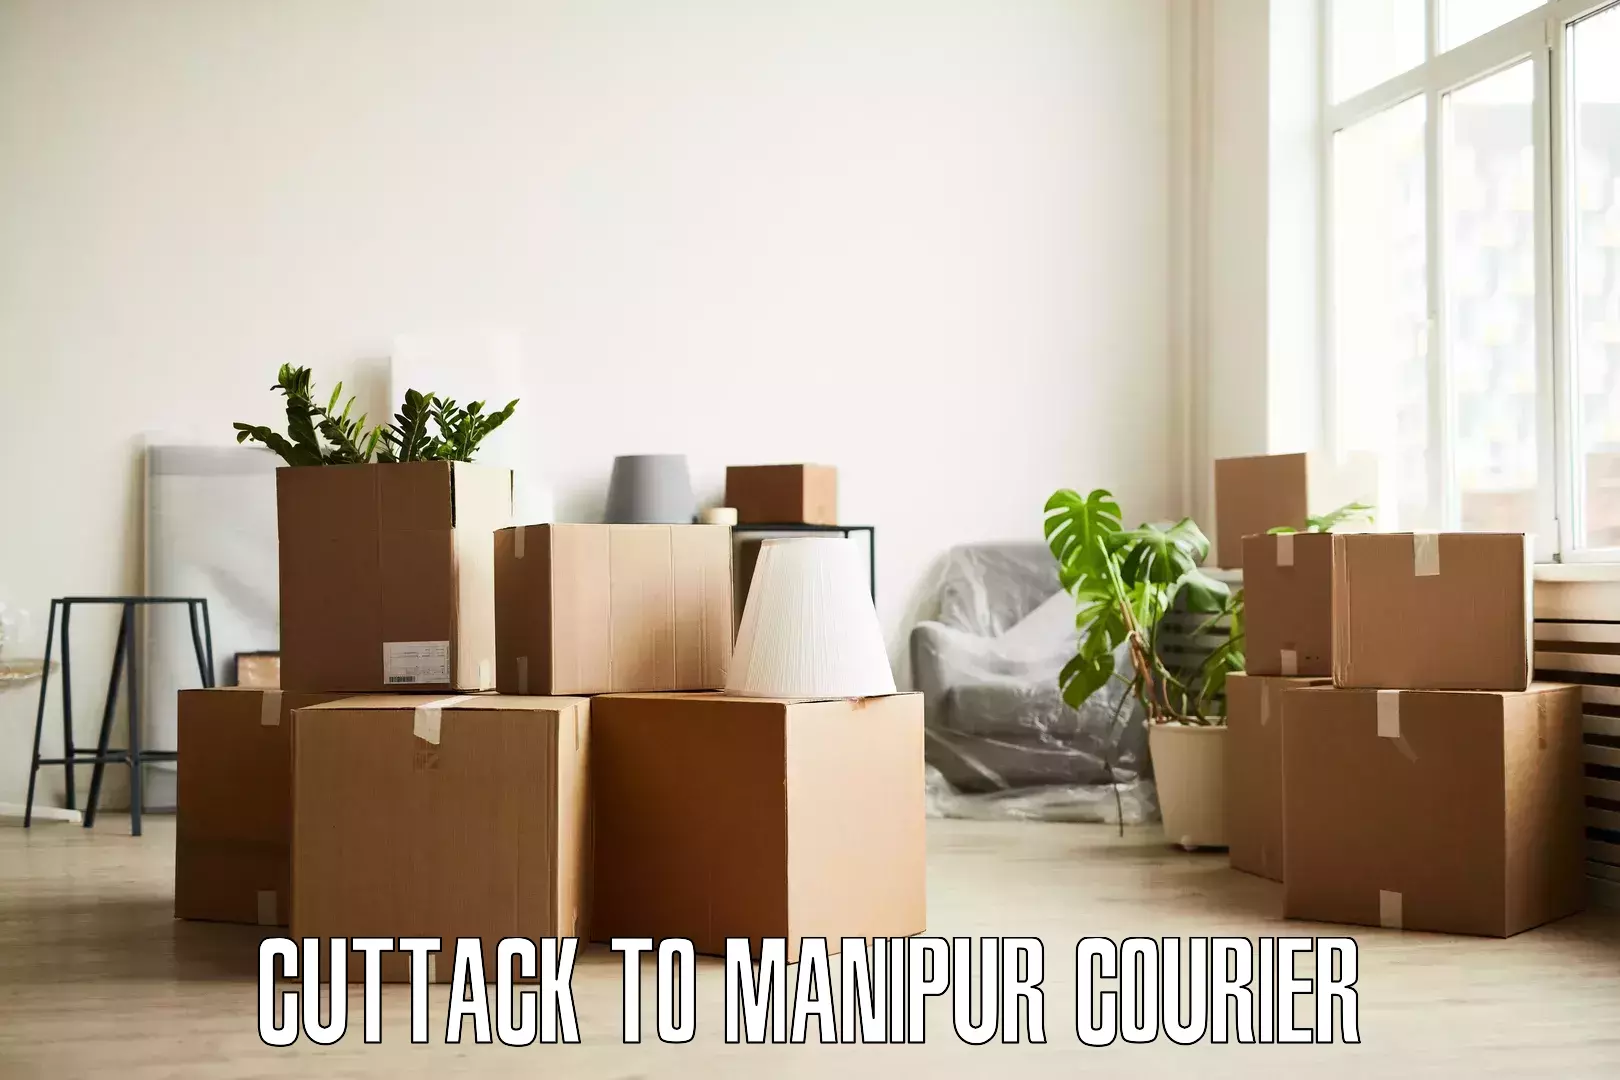 Furniture delivery service Cuttack to Moirang